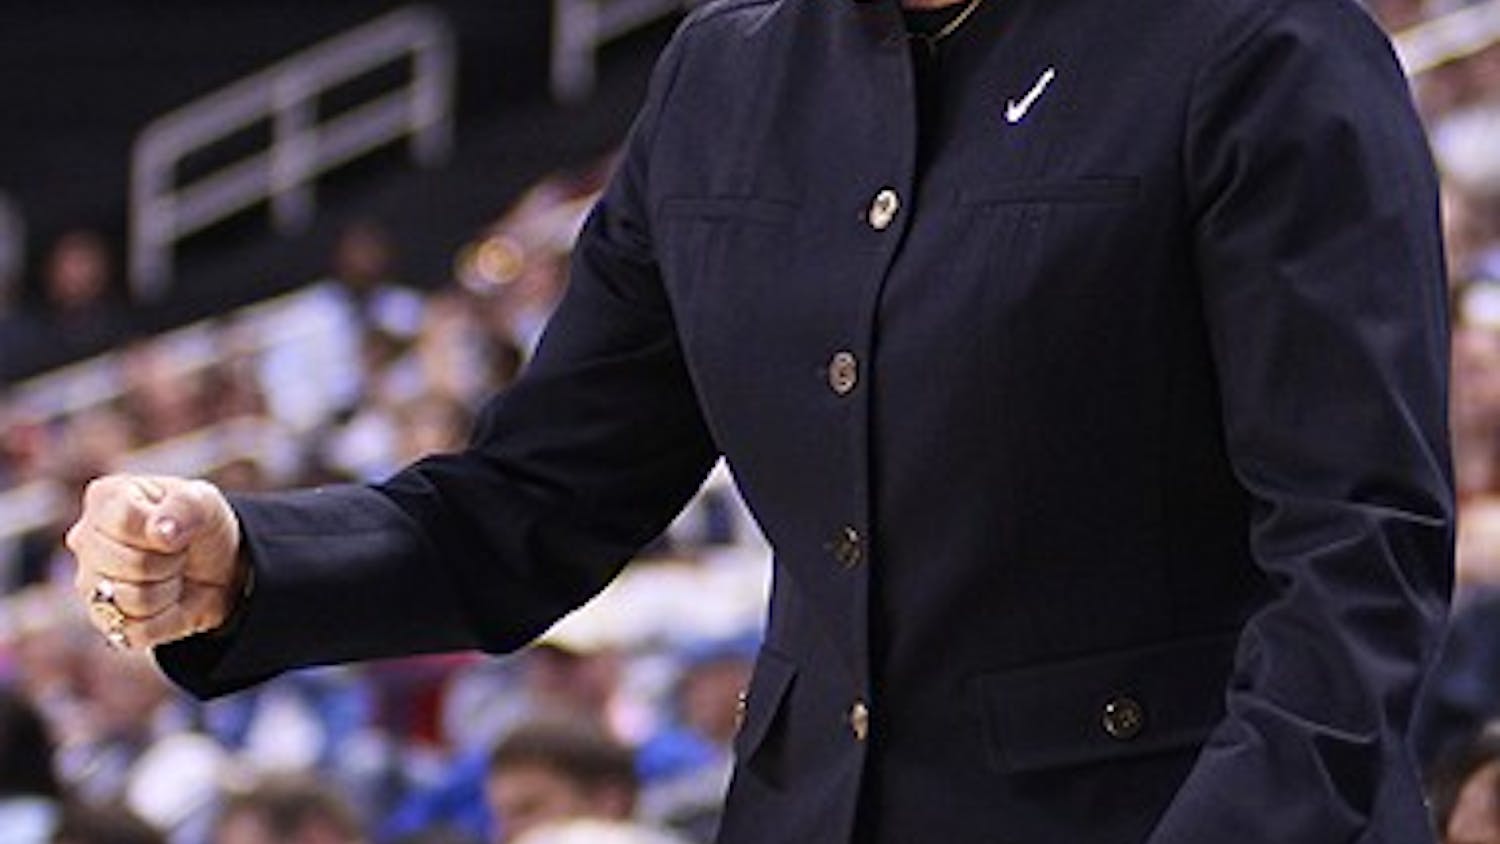 	North Carolina women’s basketball coach Sylvia Hatchell was selected to the Naismith Memorial Hall of Fame Class of 2013.